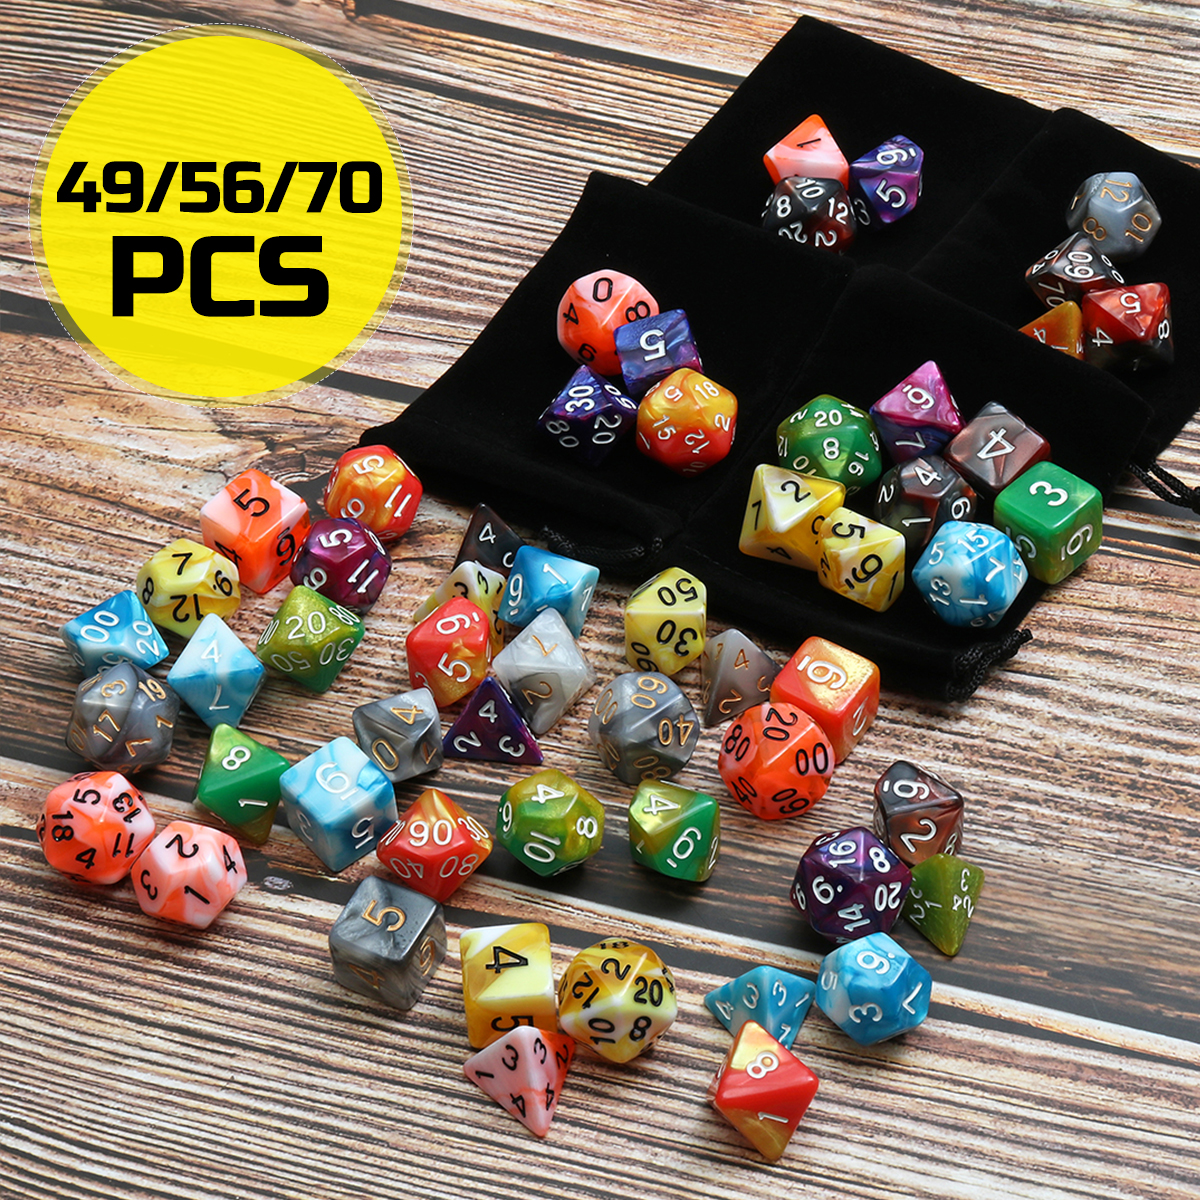 495670Pcs-Polyhedral-Dices-for-Dungeons--Dragons-Desktop-Games-With-Storage-Bags-1646830-2